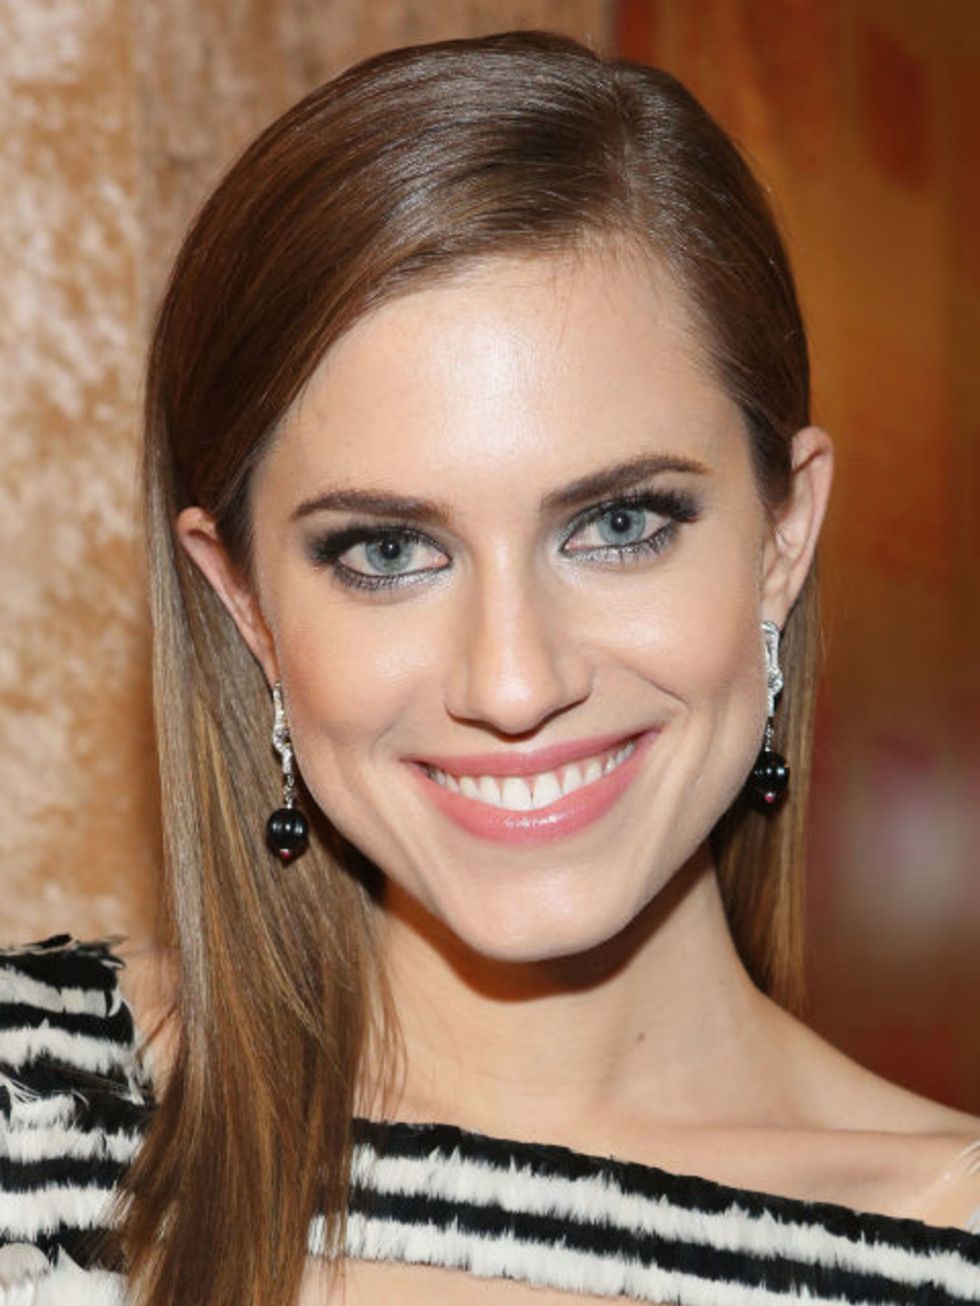 <p><strong>ALLISON WILLIAMS WOULD BE DRIVEN CRAZY BY MARNIE IRL</strong></p>

<p>"Marnie would drive me crazy if we were friends in real life," Williams told BuzzFeed. "But I have to put that out of my head in order to play her. Like, sleeping with Elijah